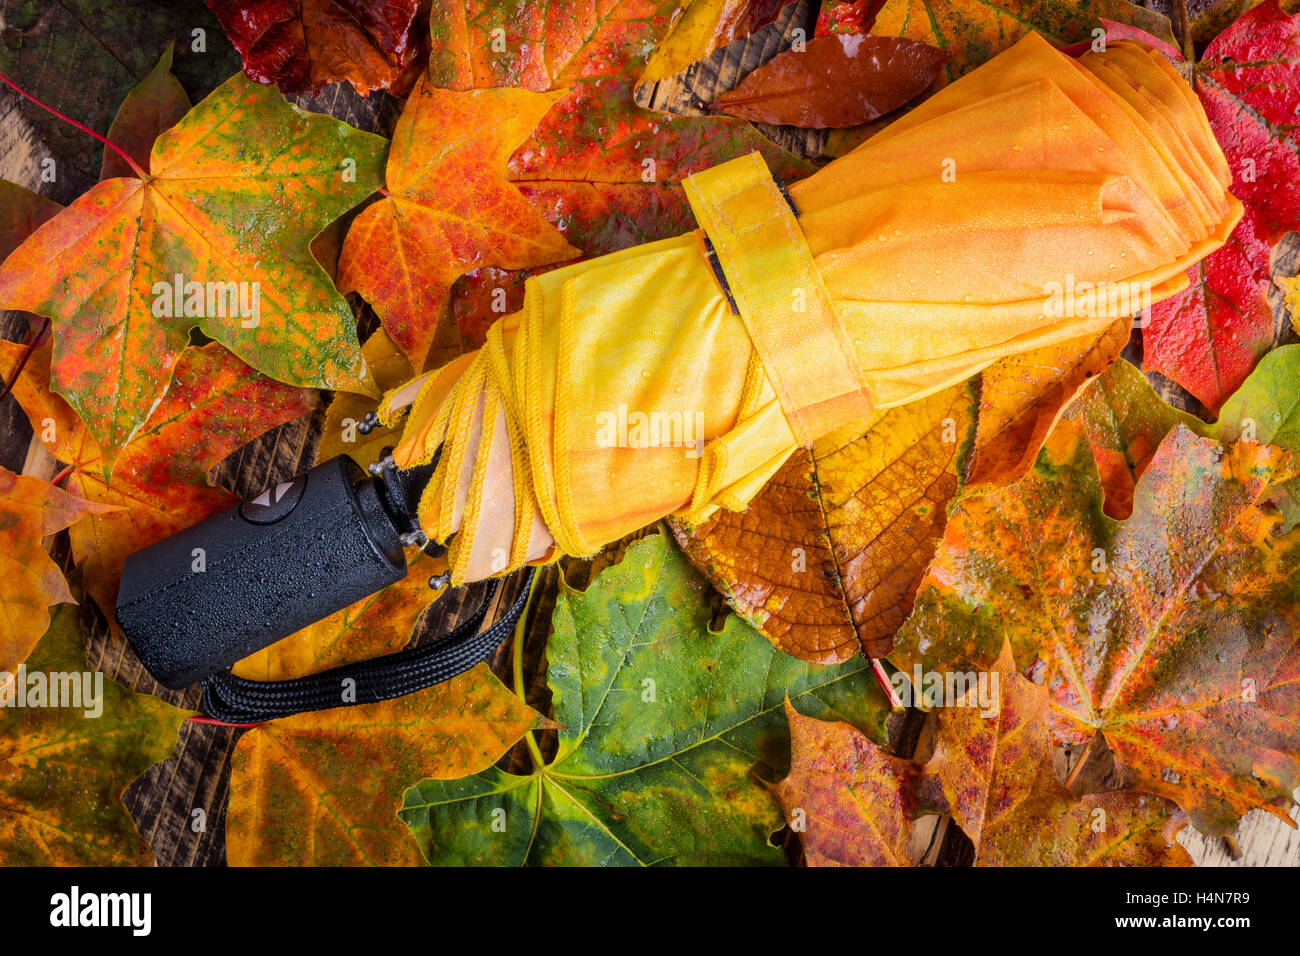 yellow umbrella on colorful wet leaves bad weather fall autumn concept Stock Photo